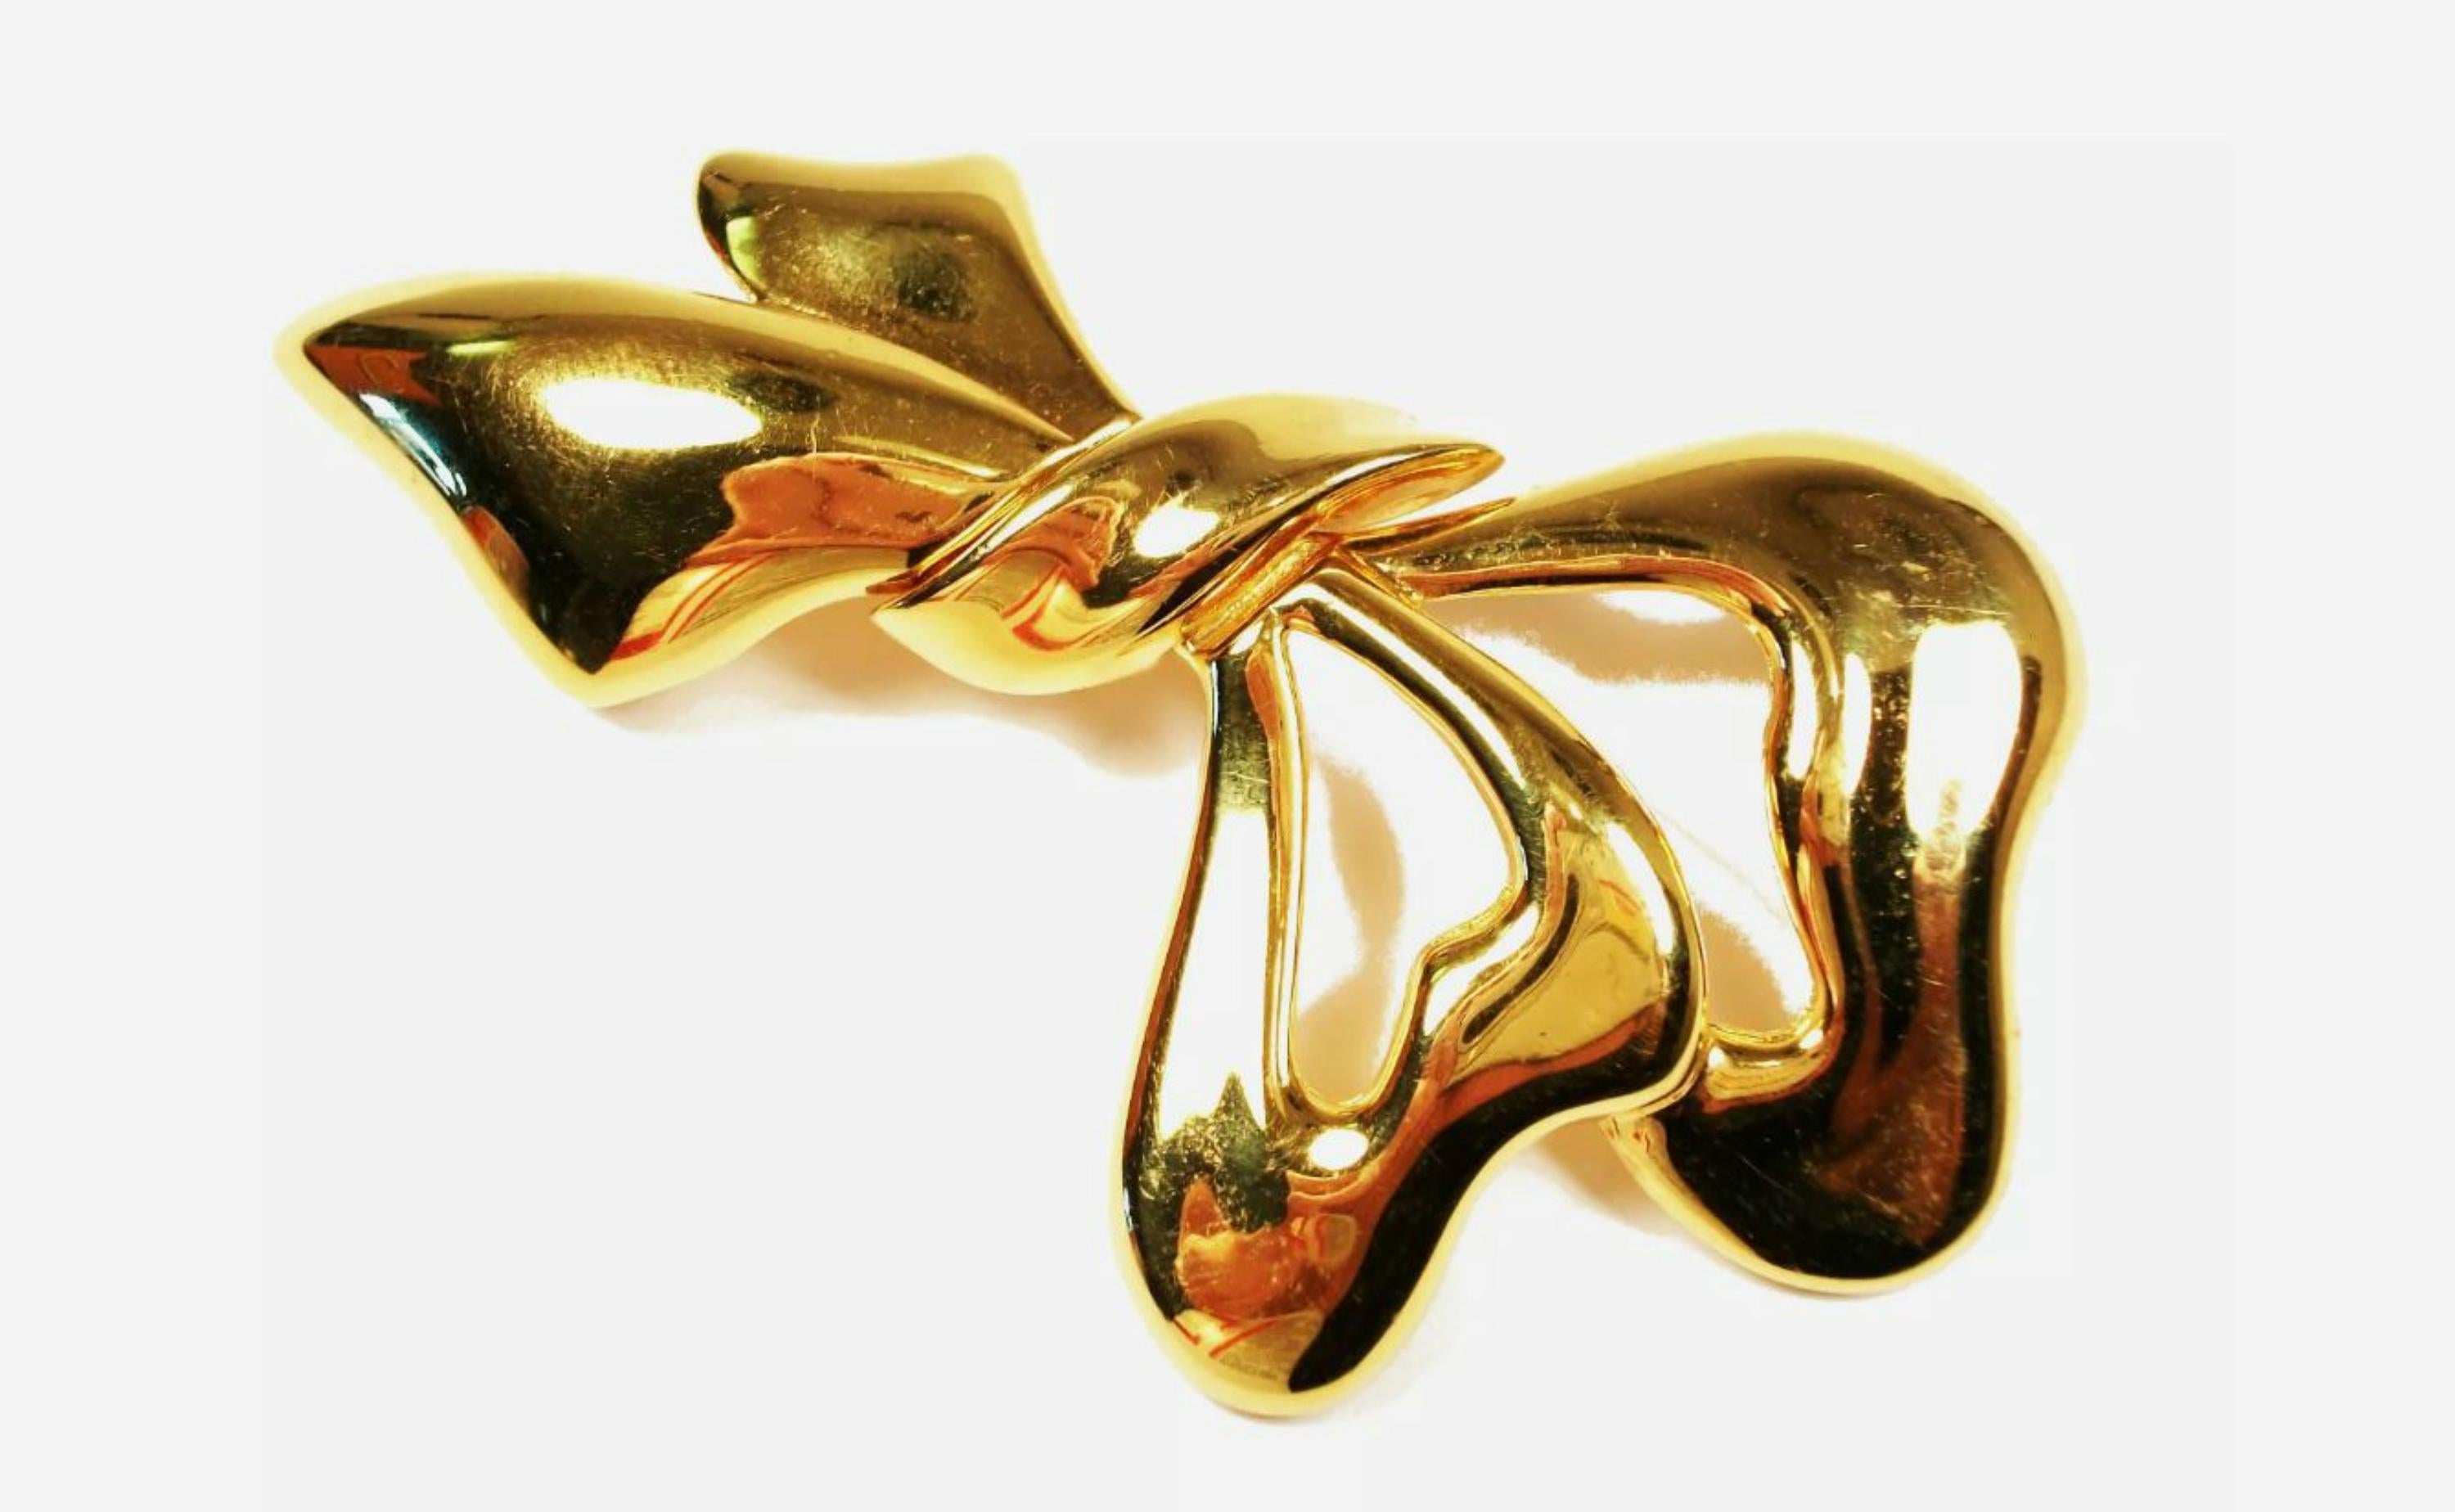 MONET - Large vintage gold tone bow brooch - signed - United States - circa 1980's.

Excellent vintage condition - no loss - no damage - no repairs - fine surface scratches from age and use - ready to wear.

Size - 3